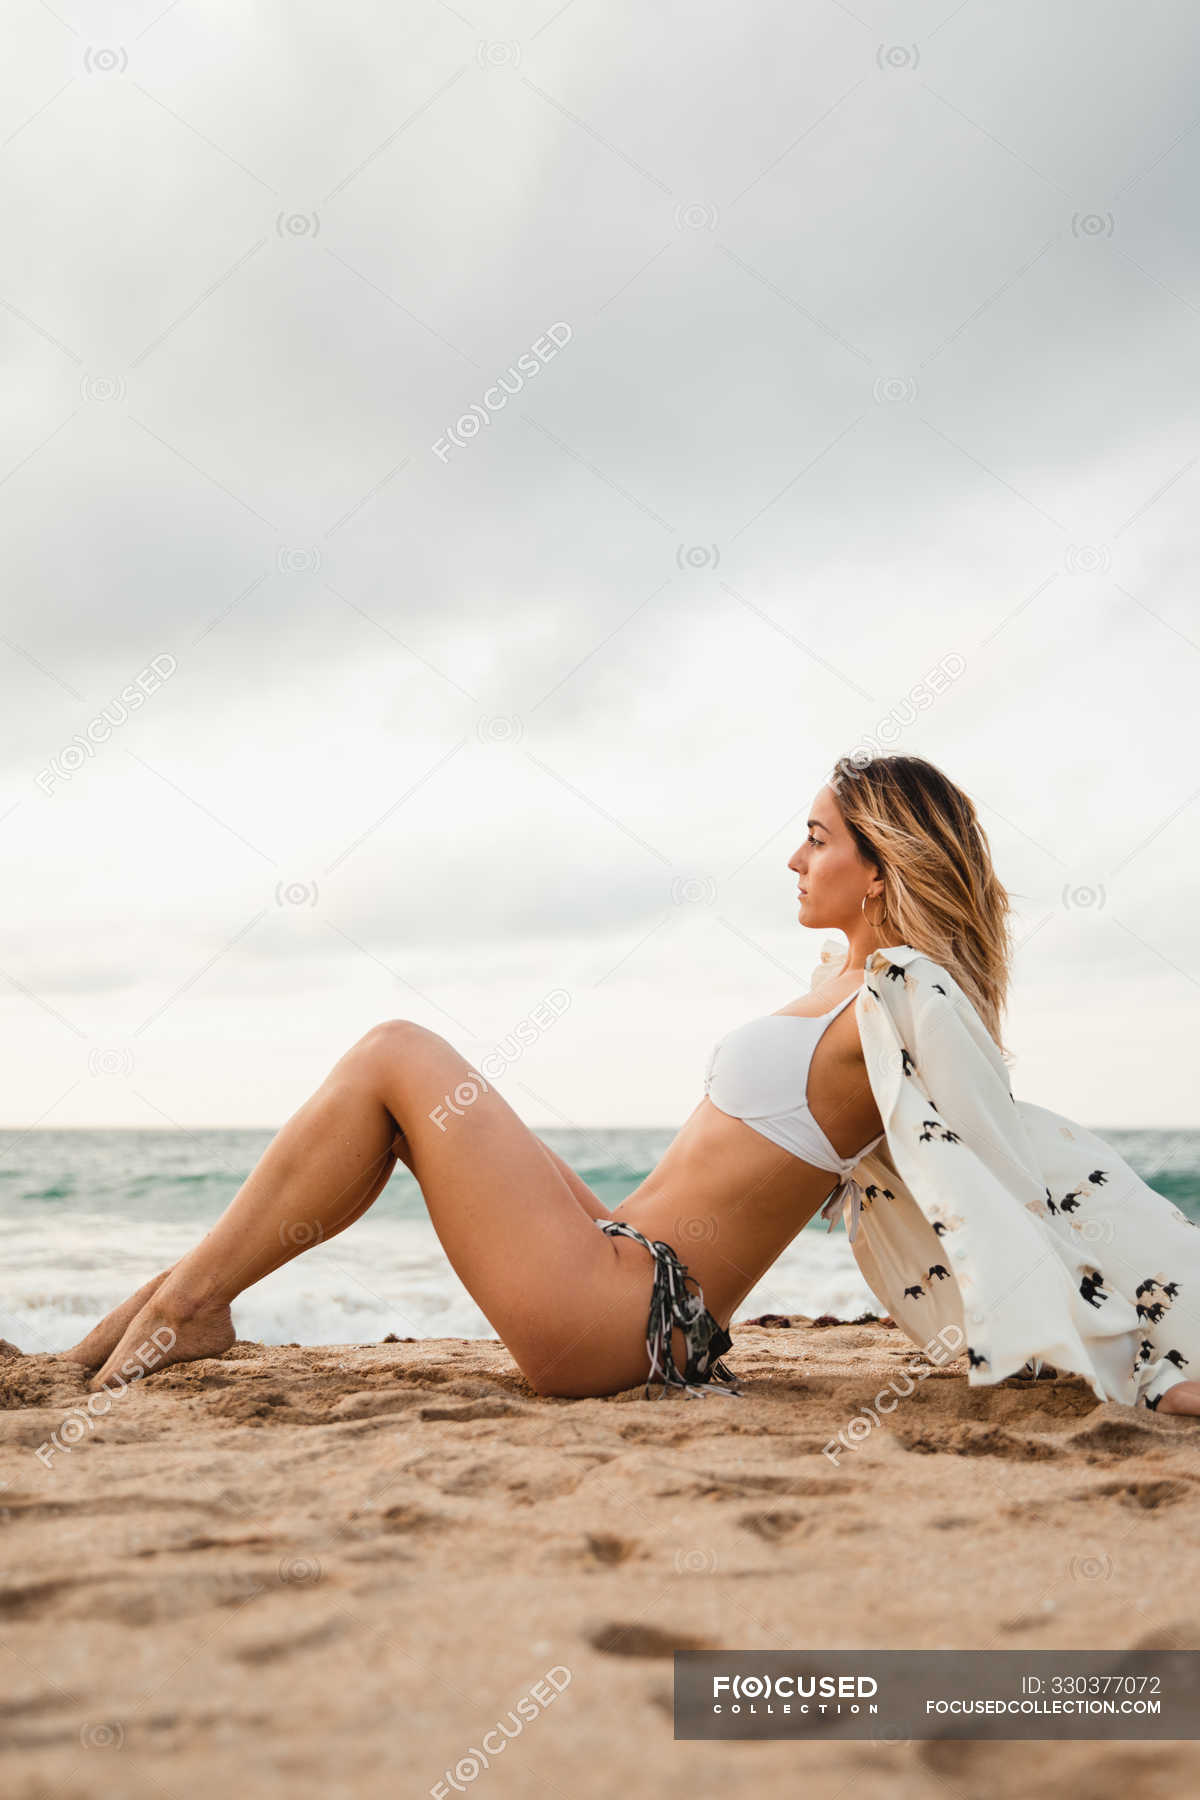 Koningin Bereiken Gehakt Side view of slim woman in bikini and blouse leaning back and looking away  while sitting on sandy coast against gray overcast sky — attractive, calm -  Stock Photo | #330377072